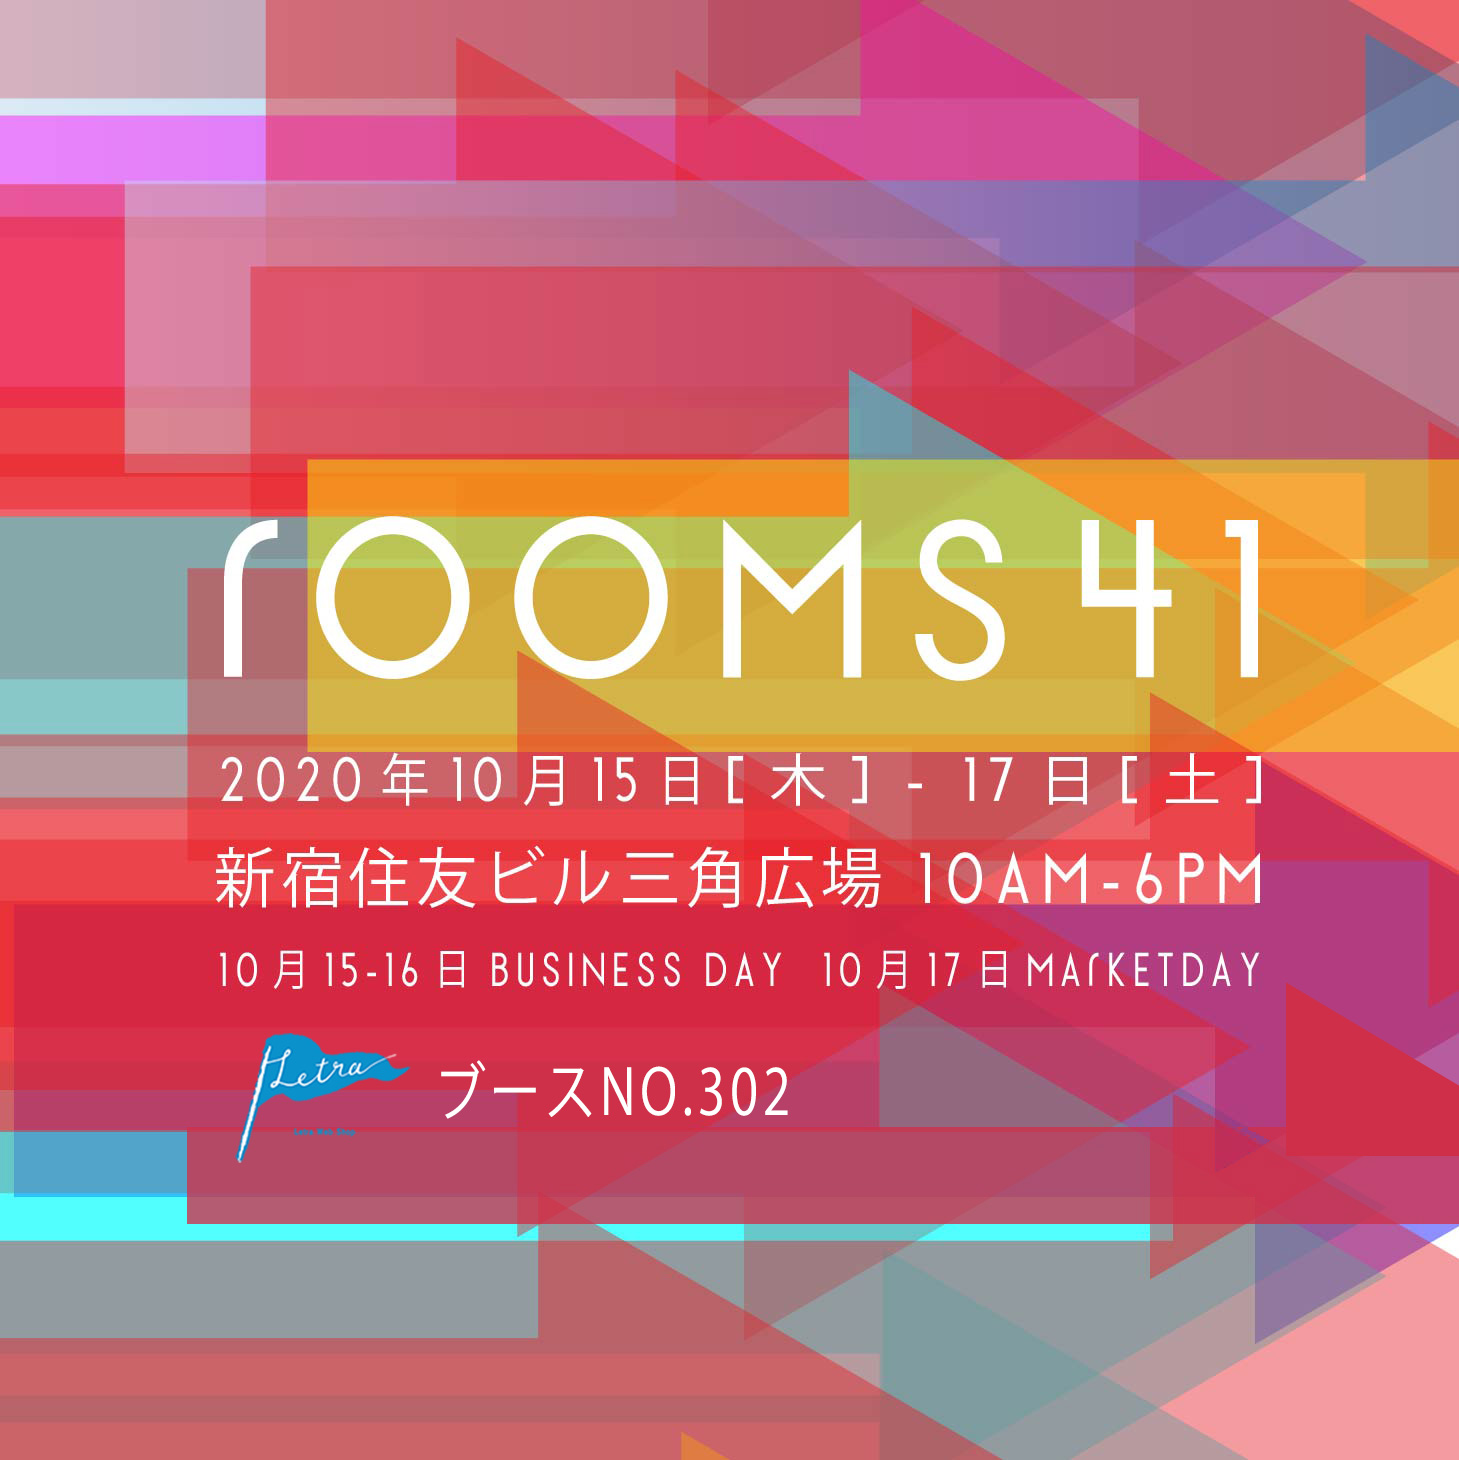 rooms41 出展します。